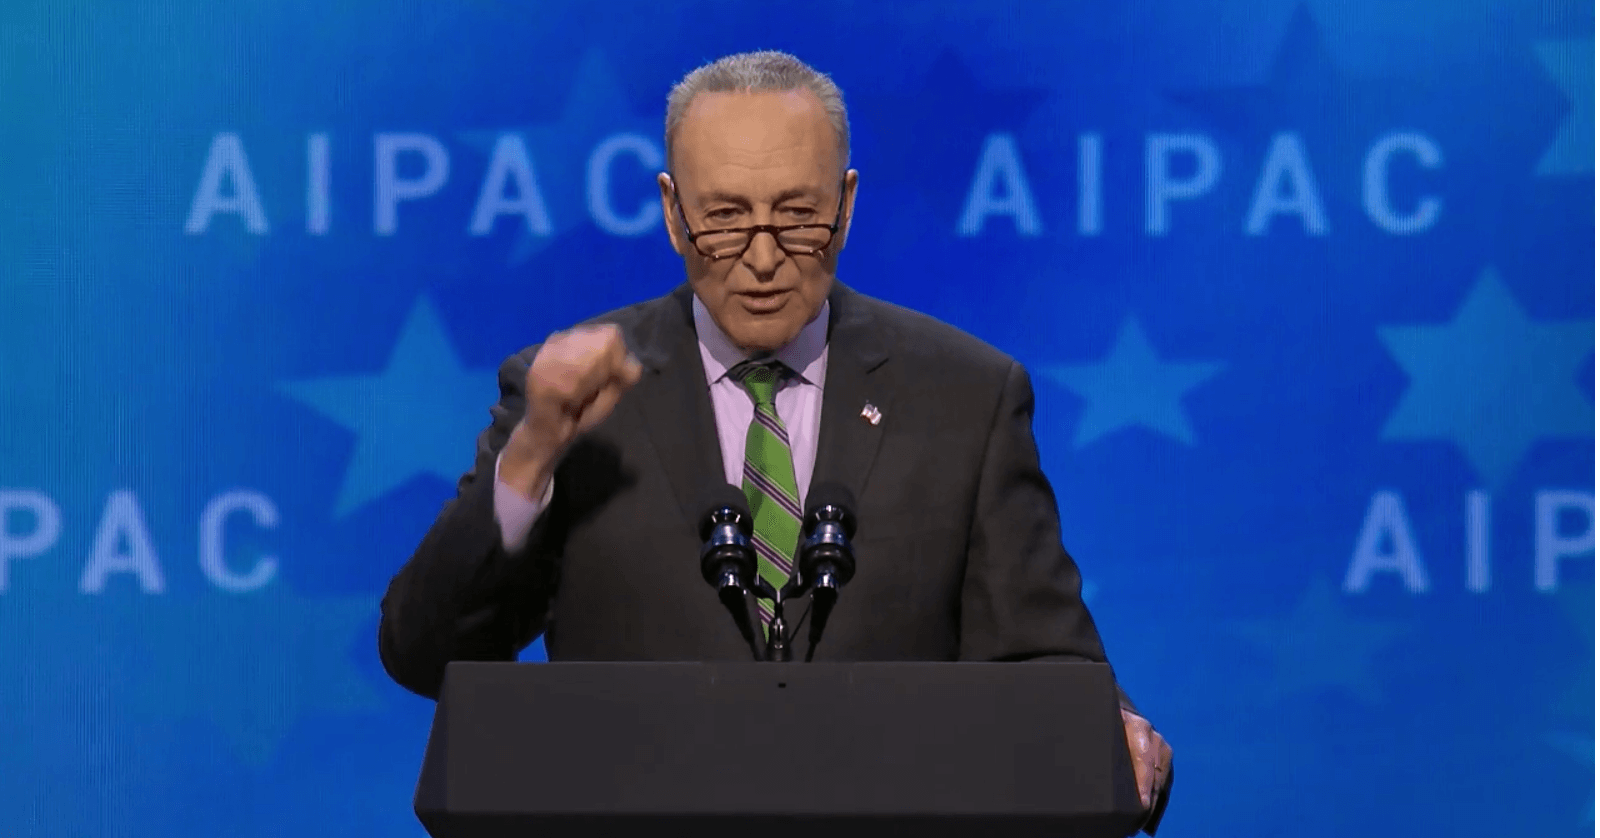 Sen. Chuck Schumer speaking at AIPAC, on March 5, 2018.